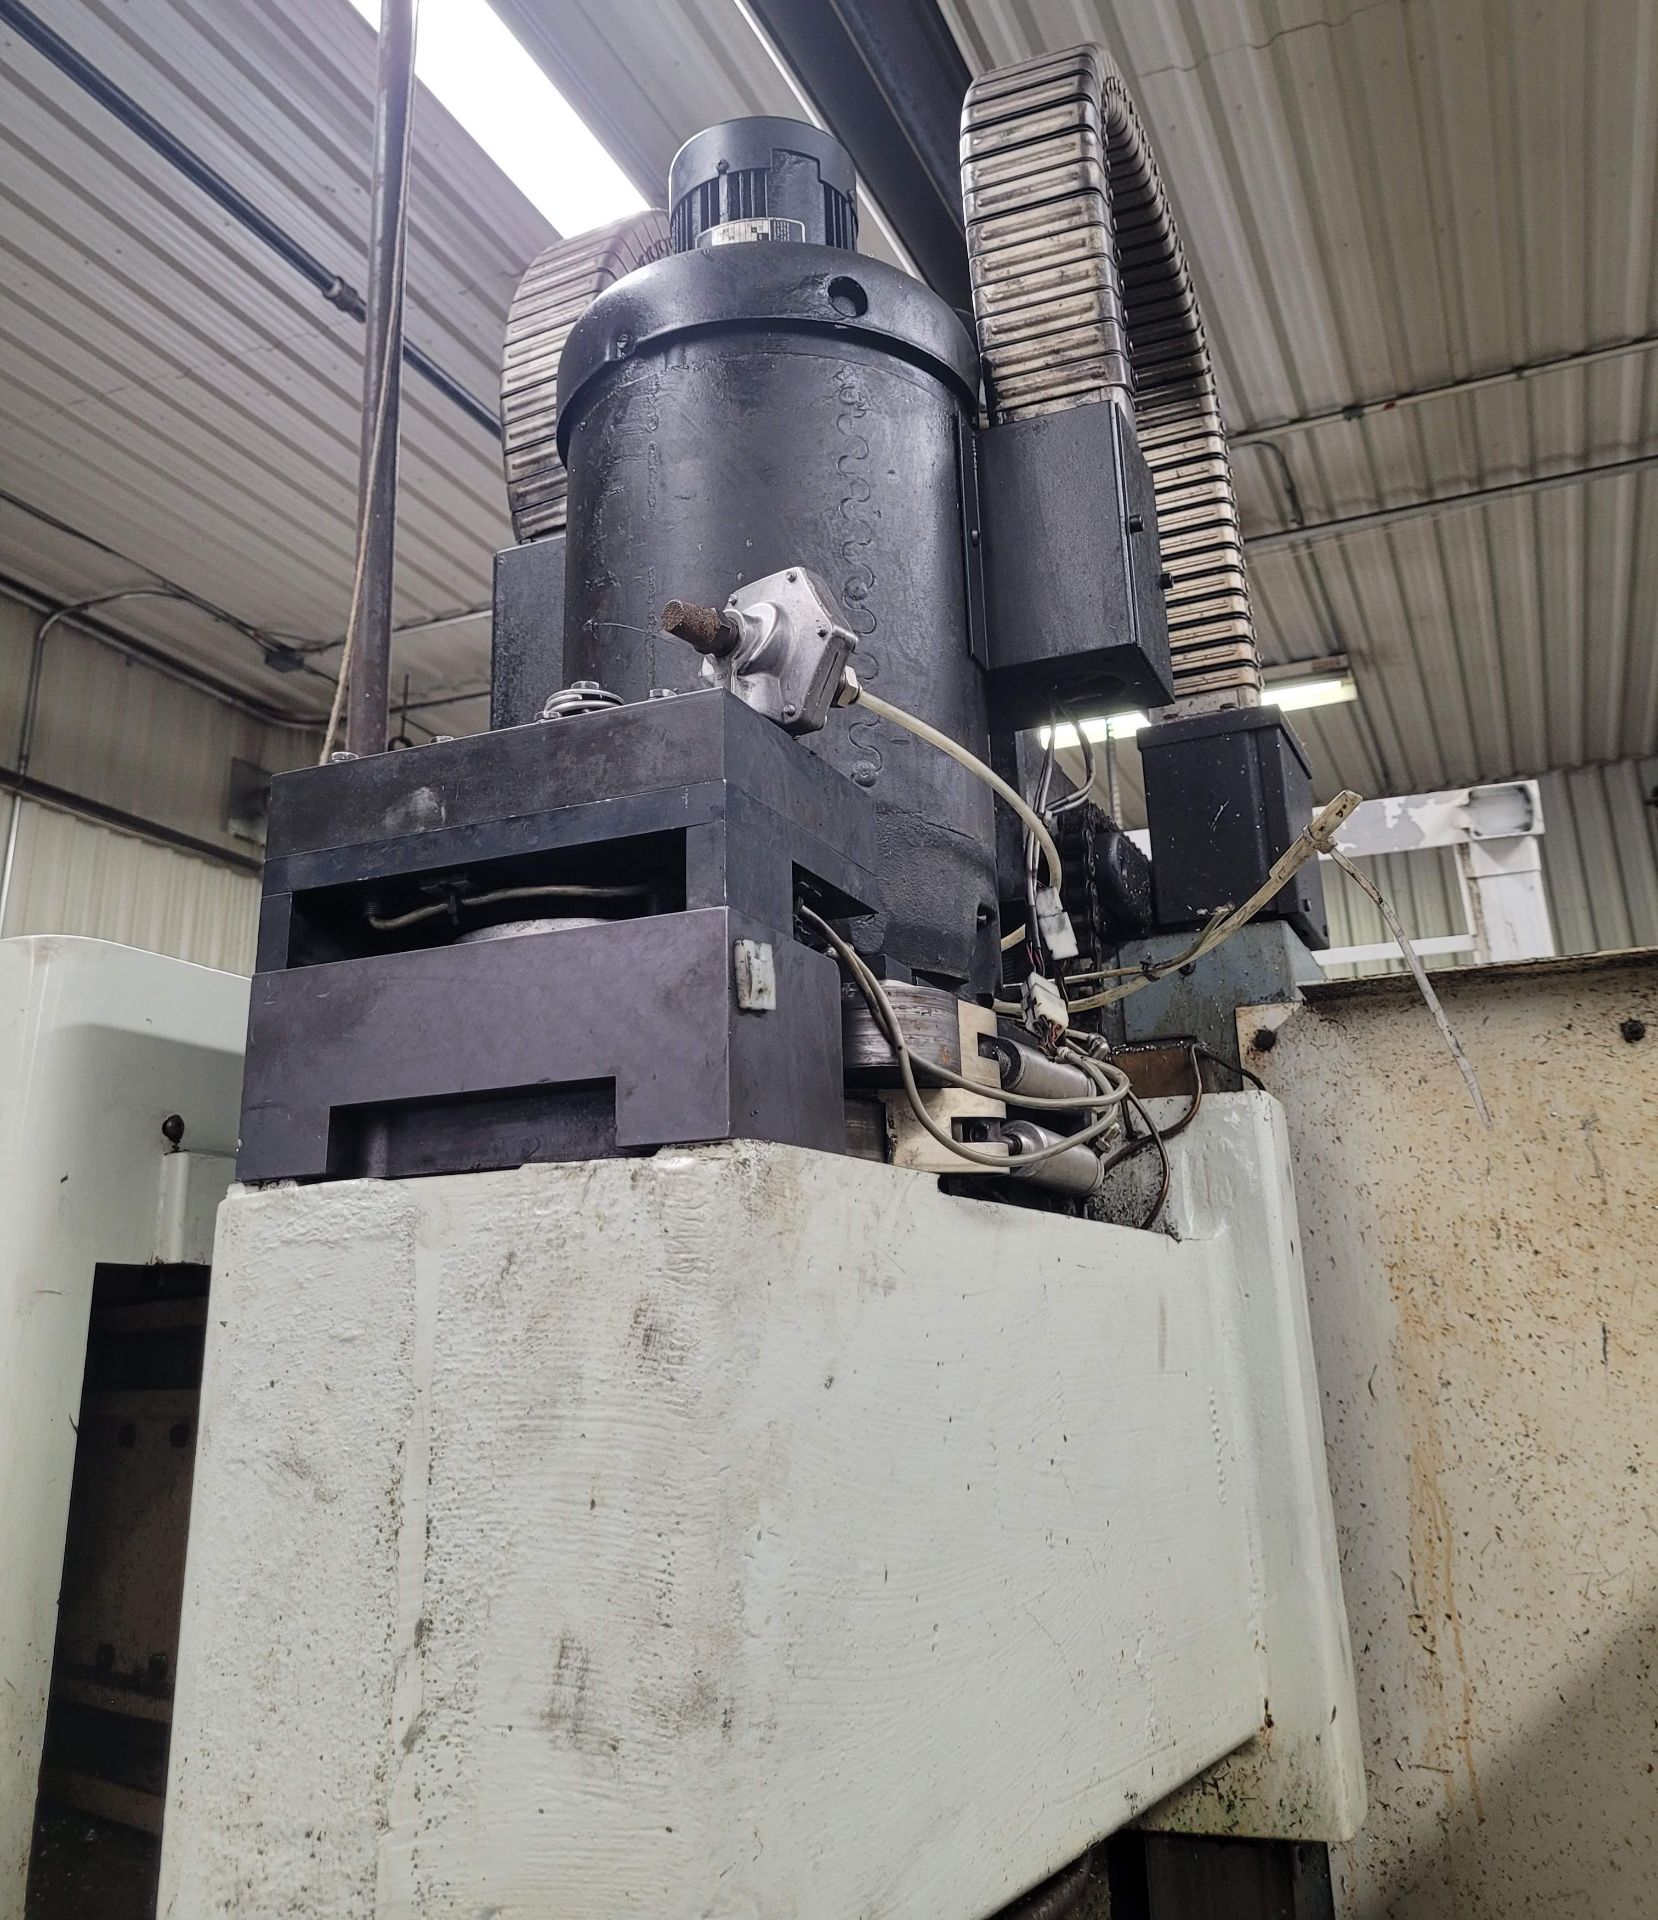 FADAL VMC4020 906-1 CNC VERTICAL MACHINING CENTER, CNC CONTROL, 10,000 RPM SPINDLE, 47.9” X 20” - Image 6 of 7